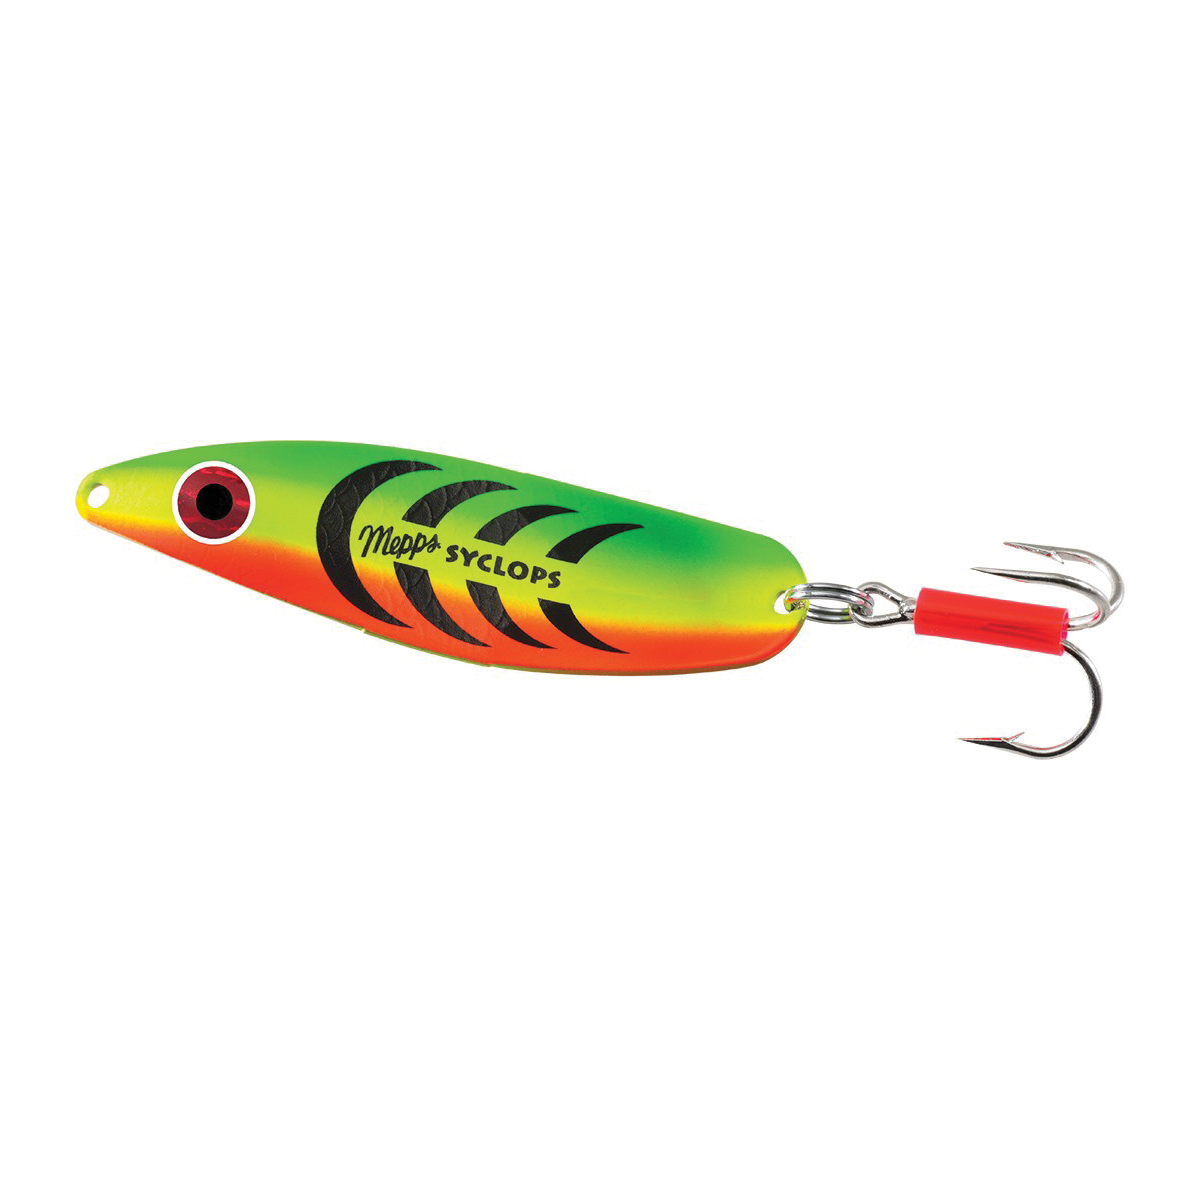 mepps SY1 HFT Fishing Lure, Syclops Spoon, Largemouth Bas